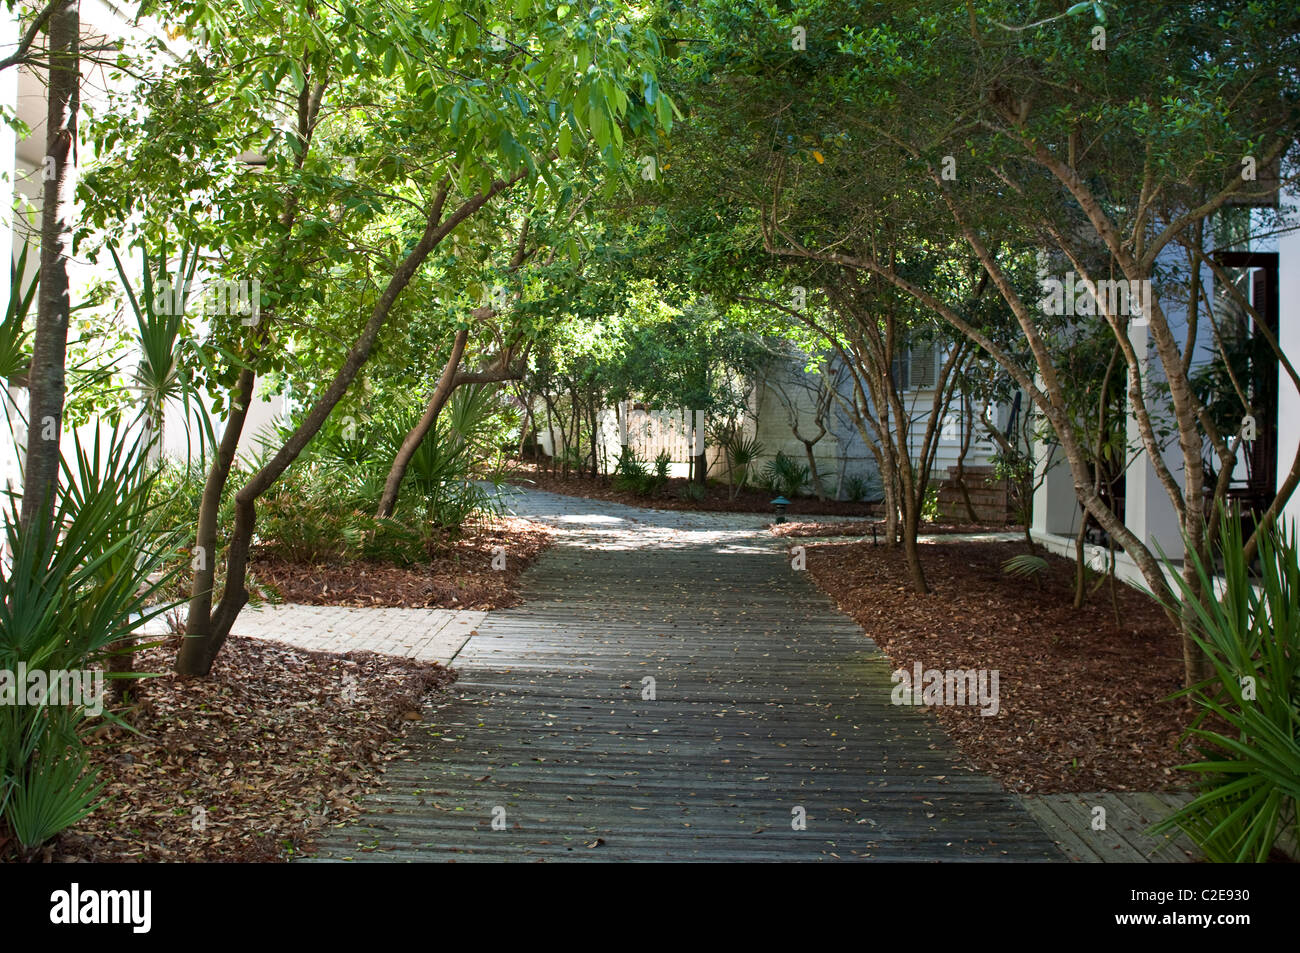 Trees arch over a boardwalk going through the town of Rosemary Beach, FL. Stock Photo